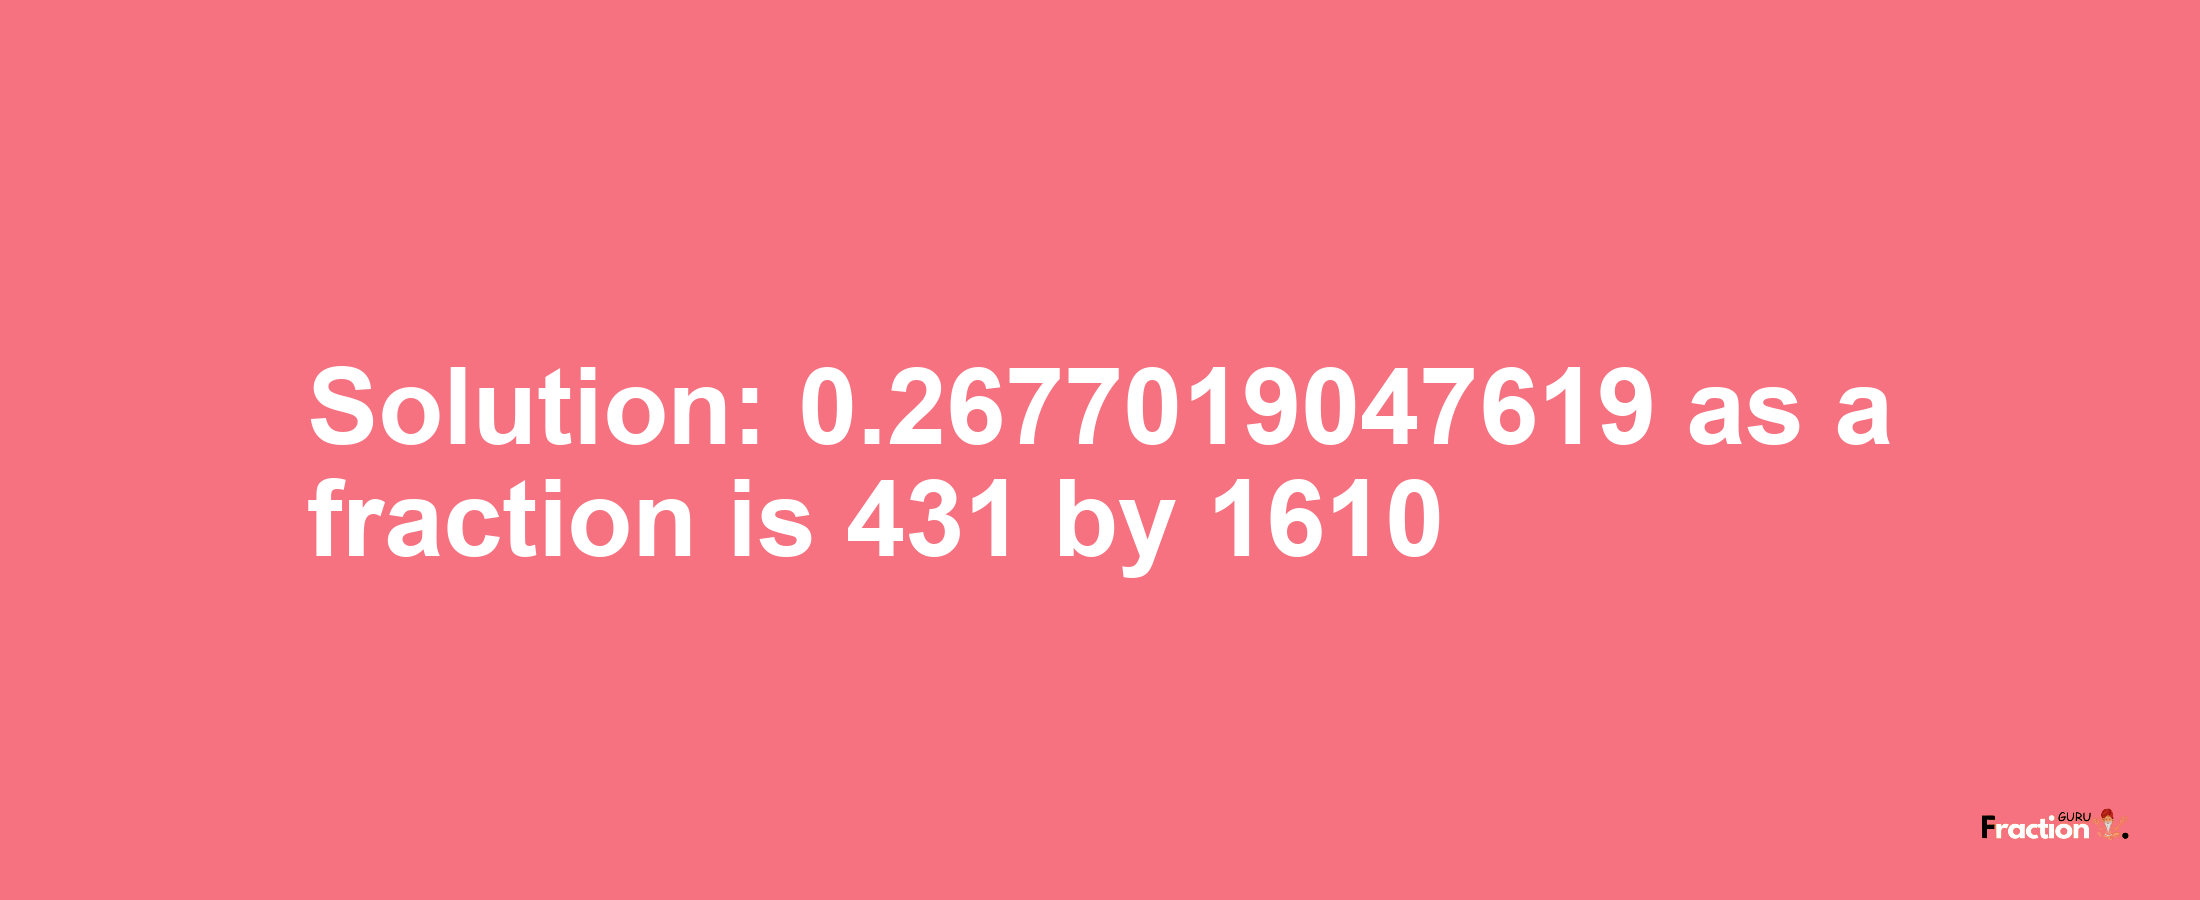 Solution:0.2677019047619 as a fraction is 431/1610